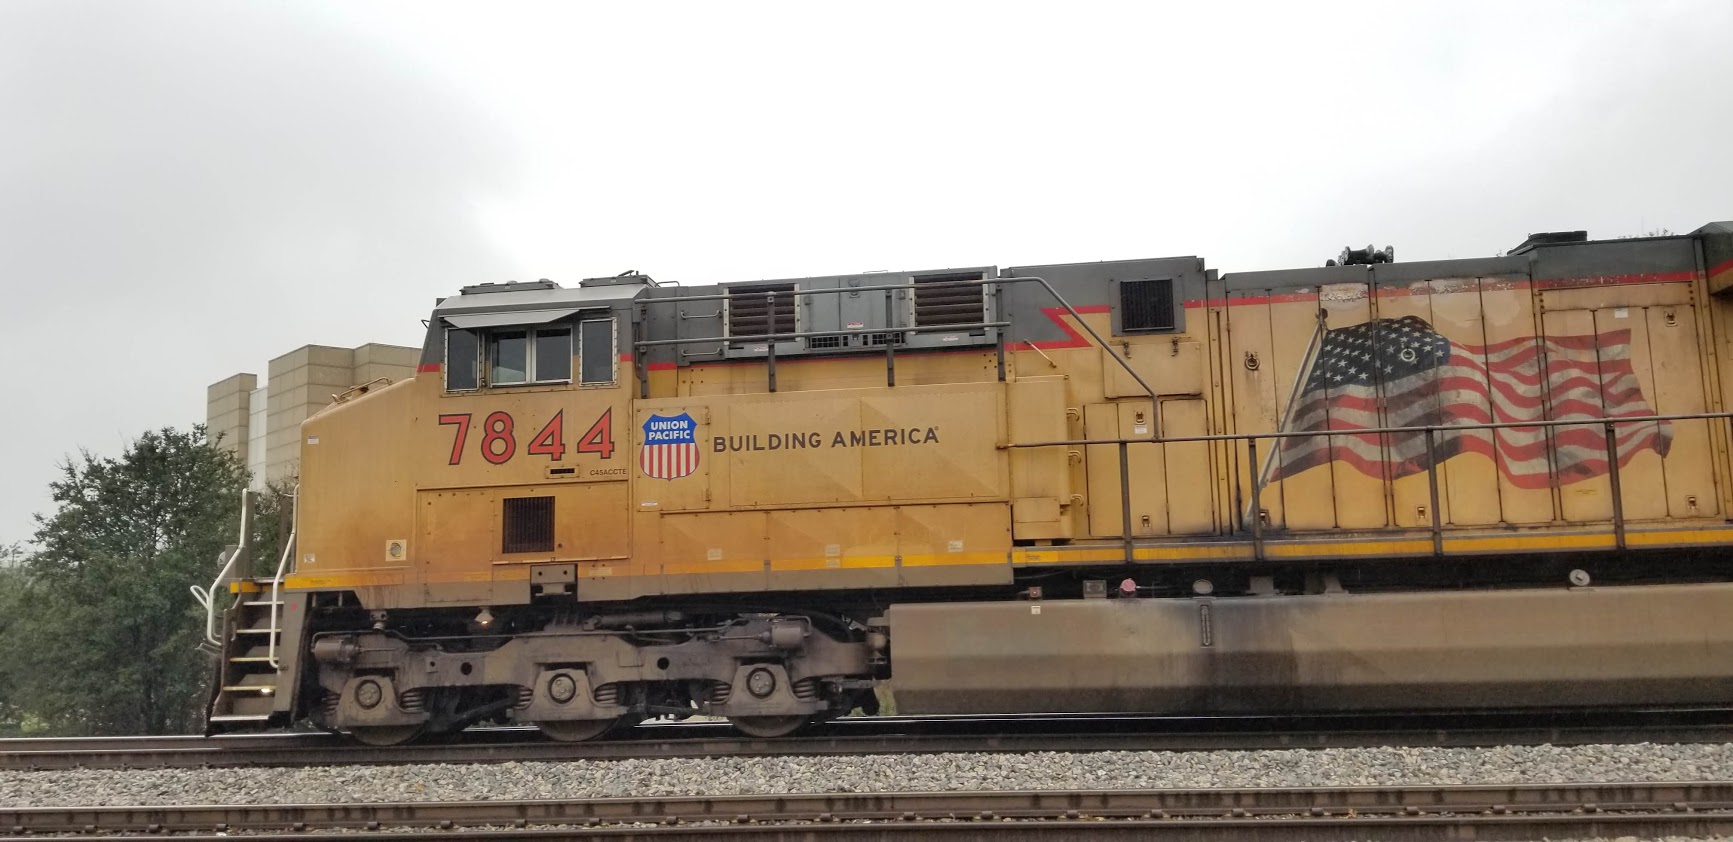 A Historic Freight Train spotted in Dallas